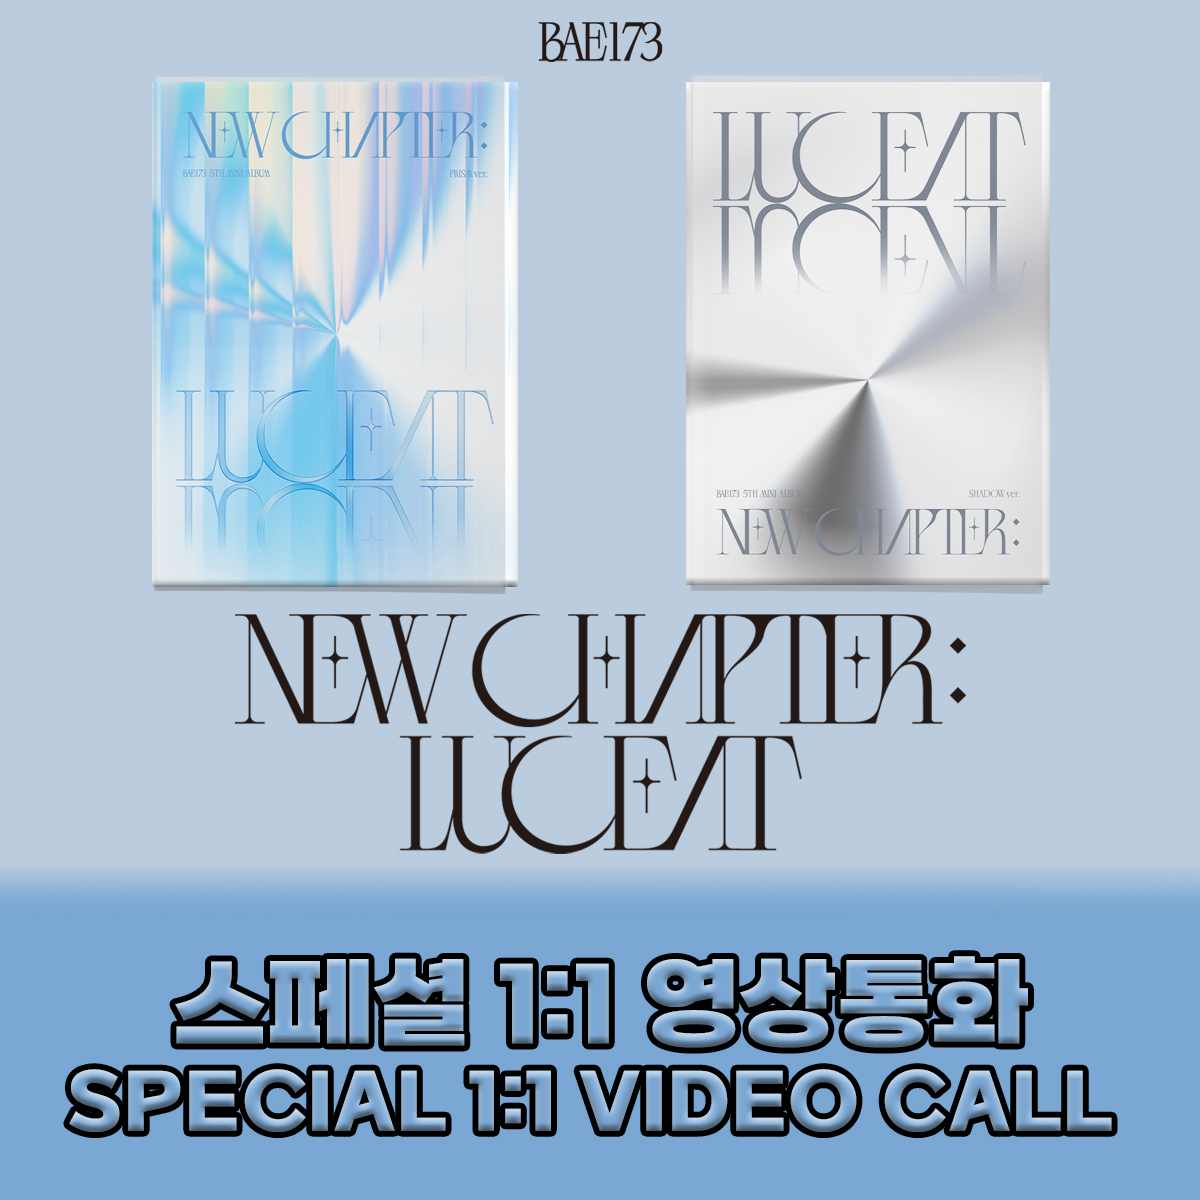 [0517 Special 1:1 Video Call] BAE1735TH MINI ALBUM &quot;NEW CHAPTER : LUCEAT&quot;.